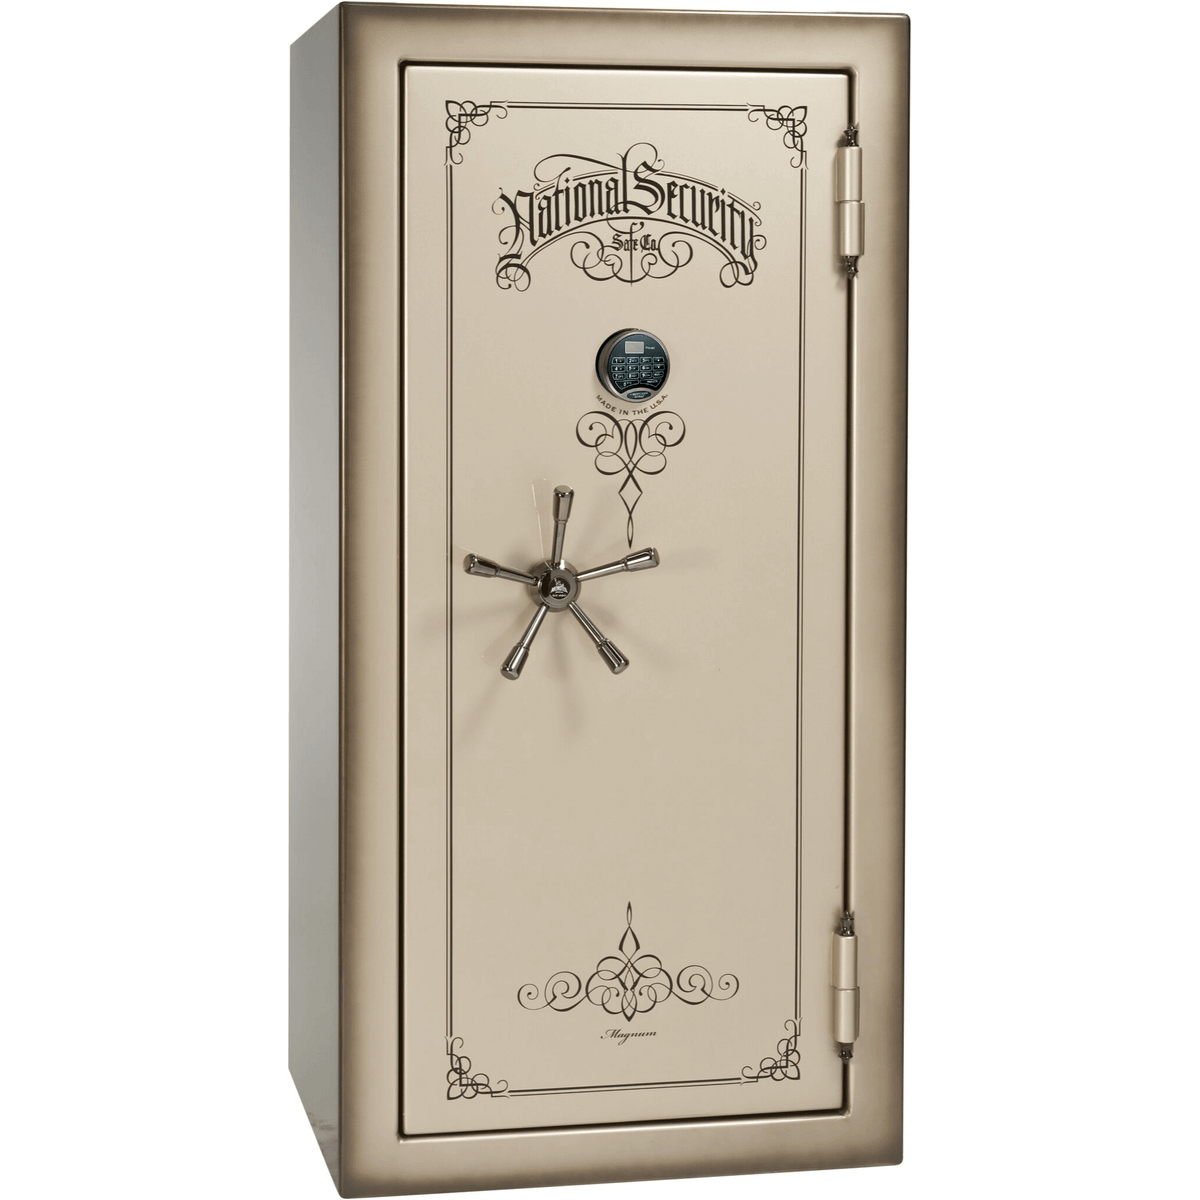 Liberty Safe National Magnum 25 in Champagne Feathered Edge Gloss with Black Chrome Electronic Lock, closed door.